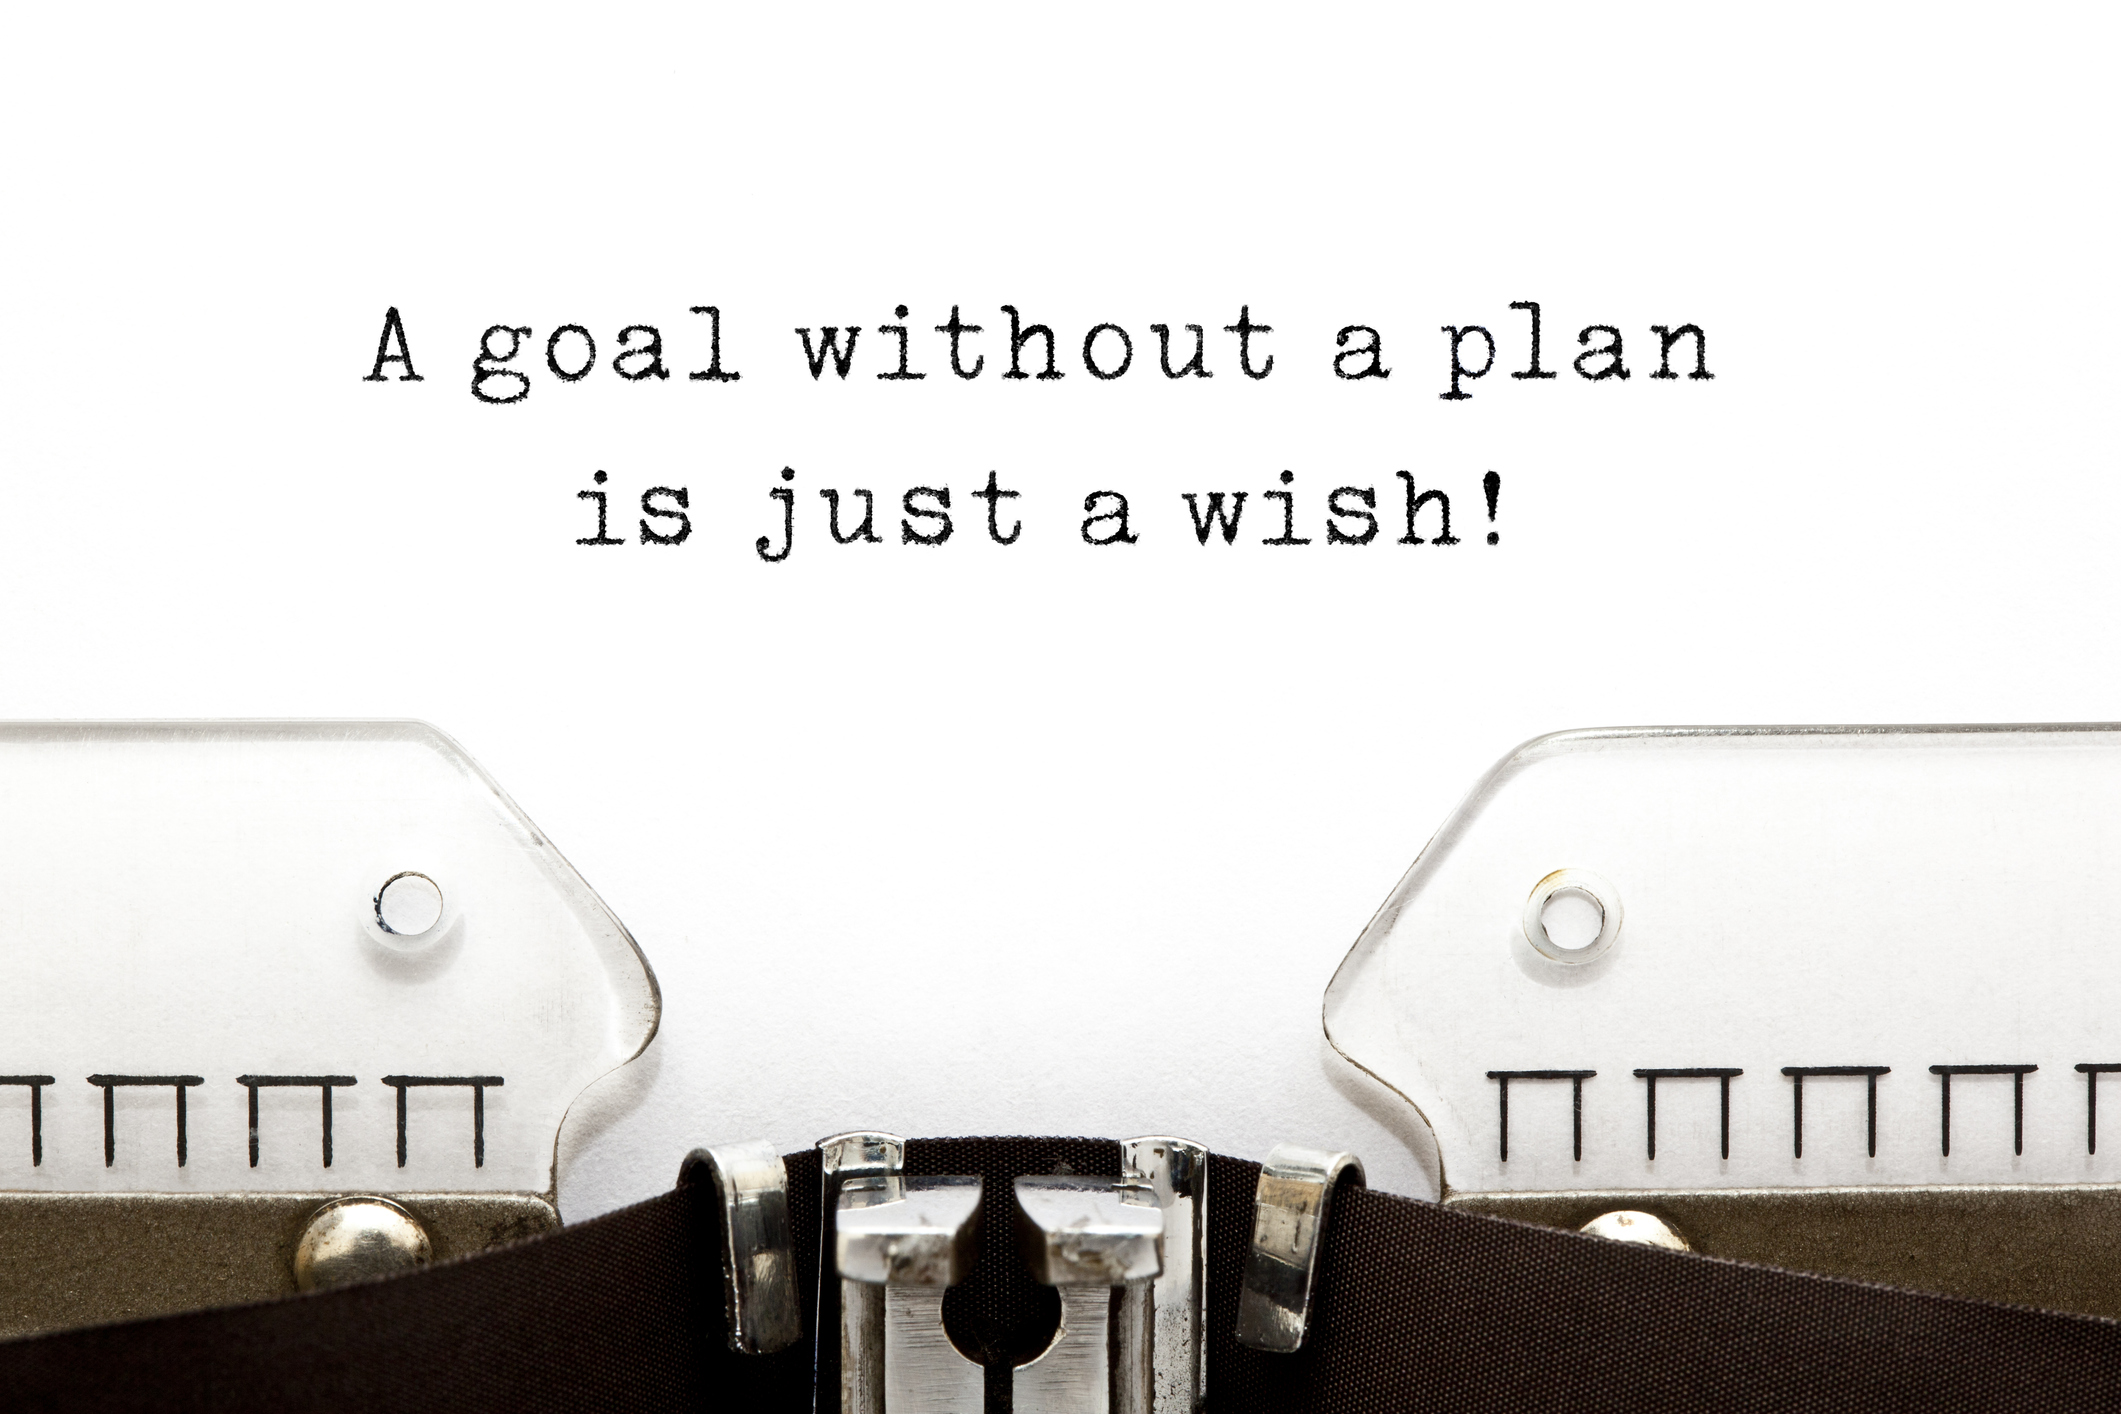 A goal without a plan is just a wish! quote printed on an old typewriter.